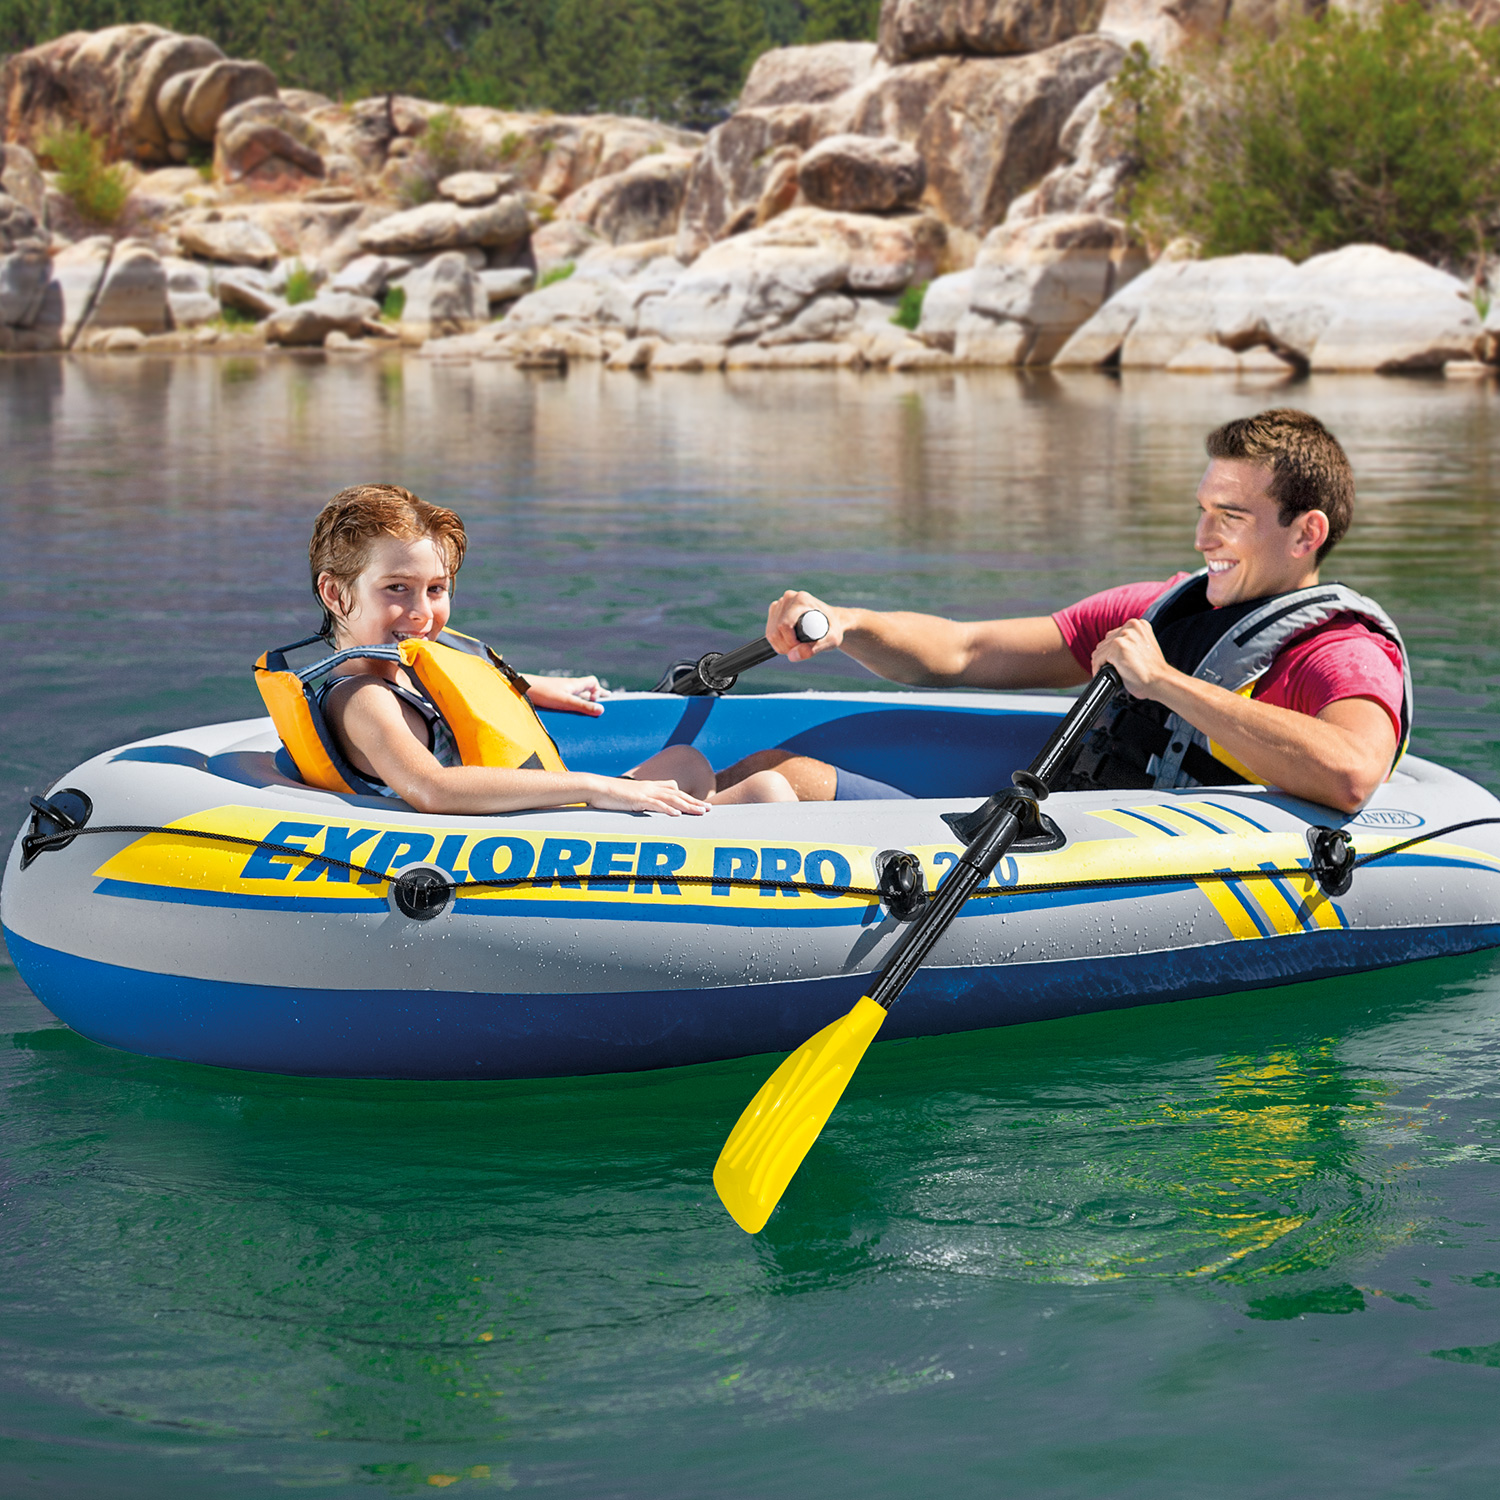 In select stores: Intex Inflatable Explorer Pro 400 two-person boat with oars & pump for $9